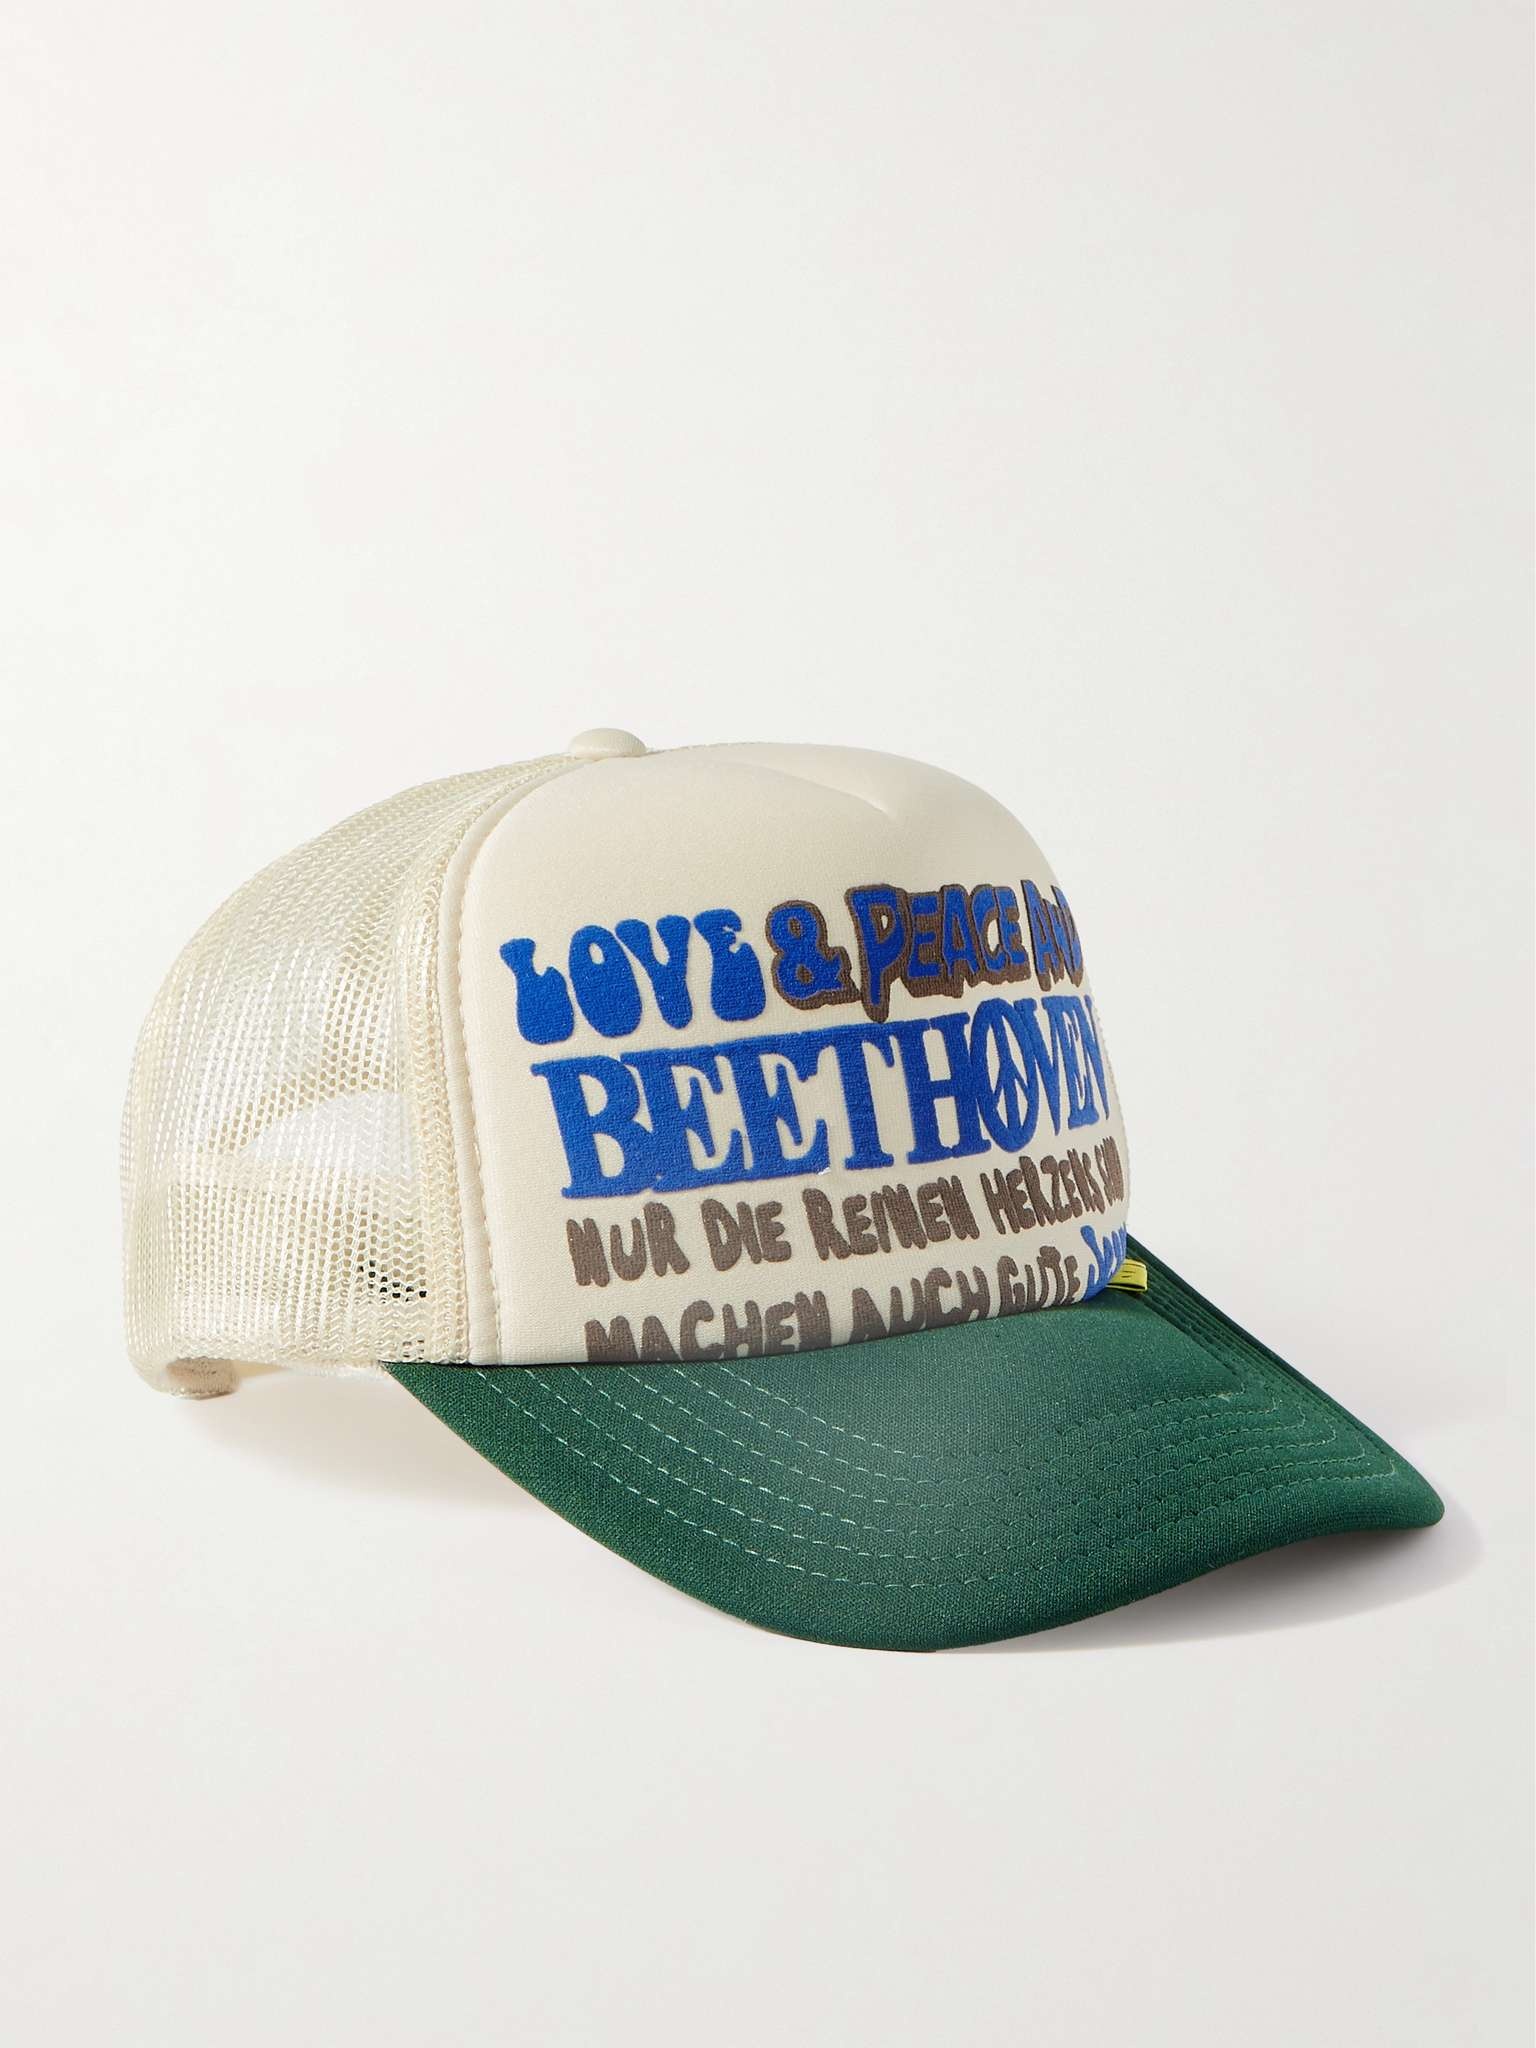 Love & Peace and Beethoven Printed Neoprene and Mesh Trucker Cap - 1